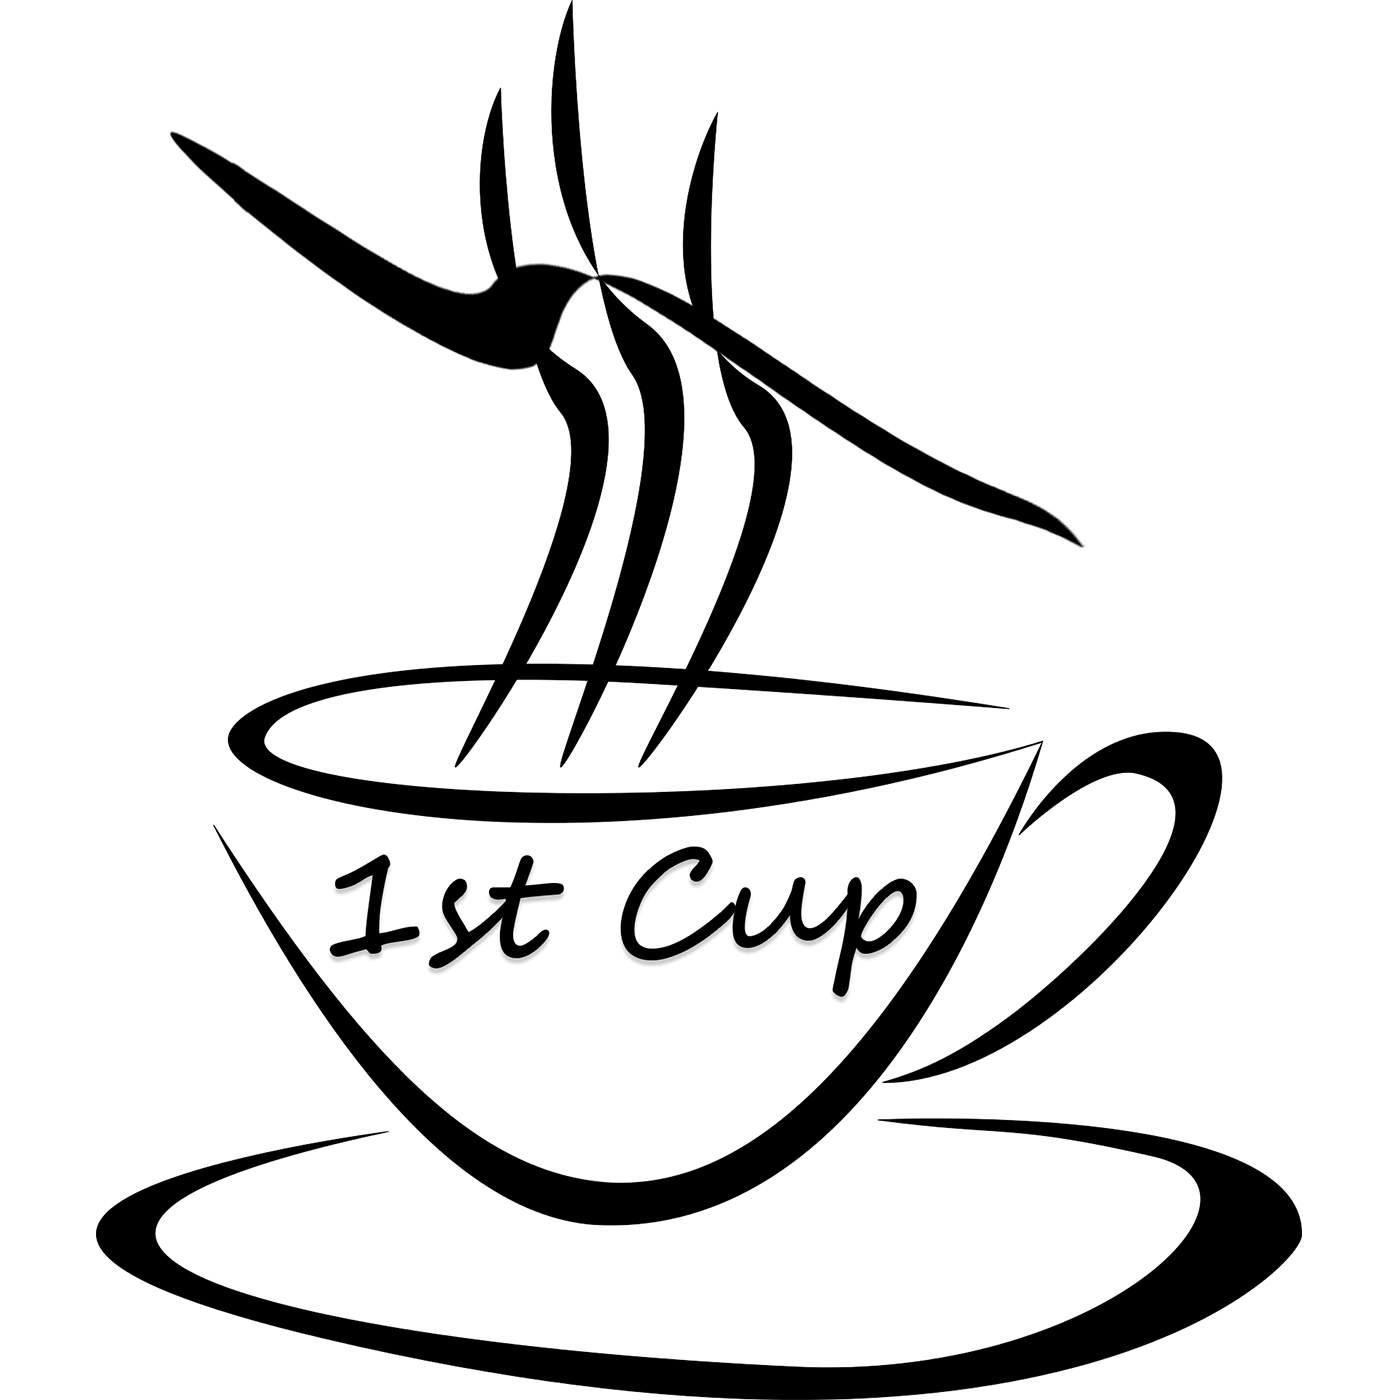 1st Cup Podcast podcast show image